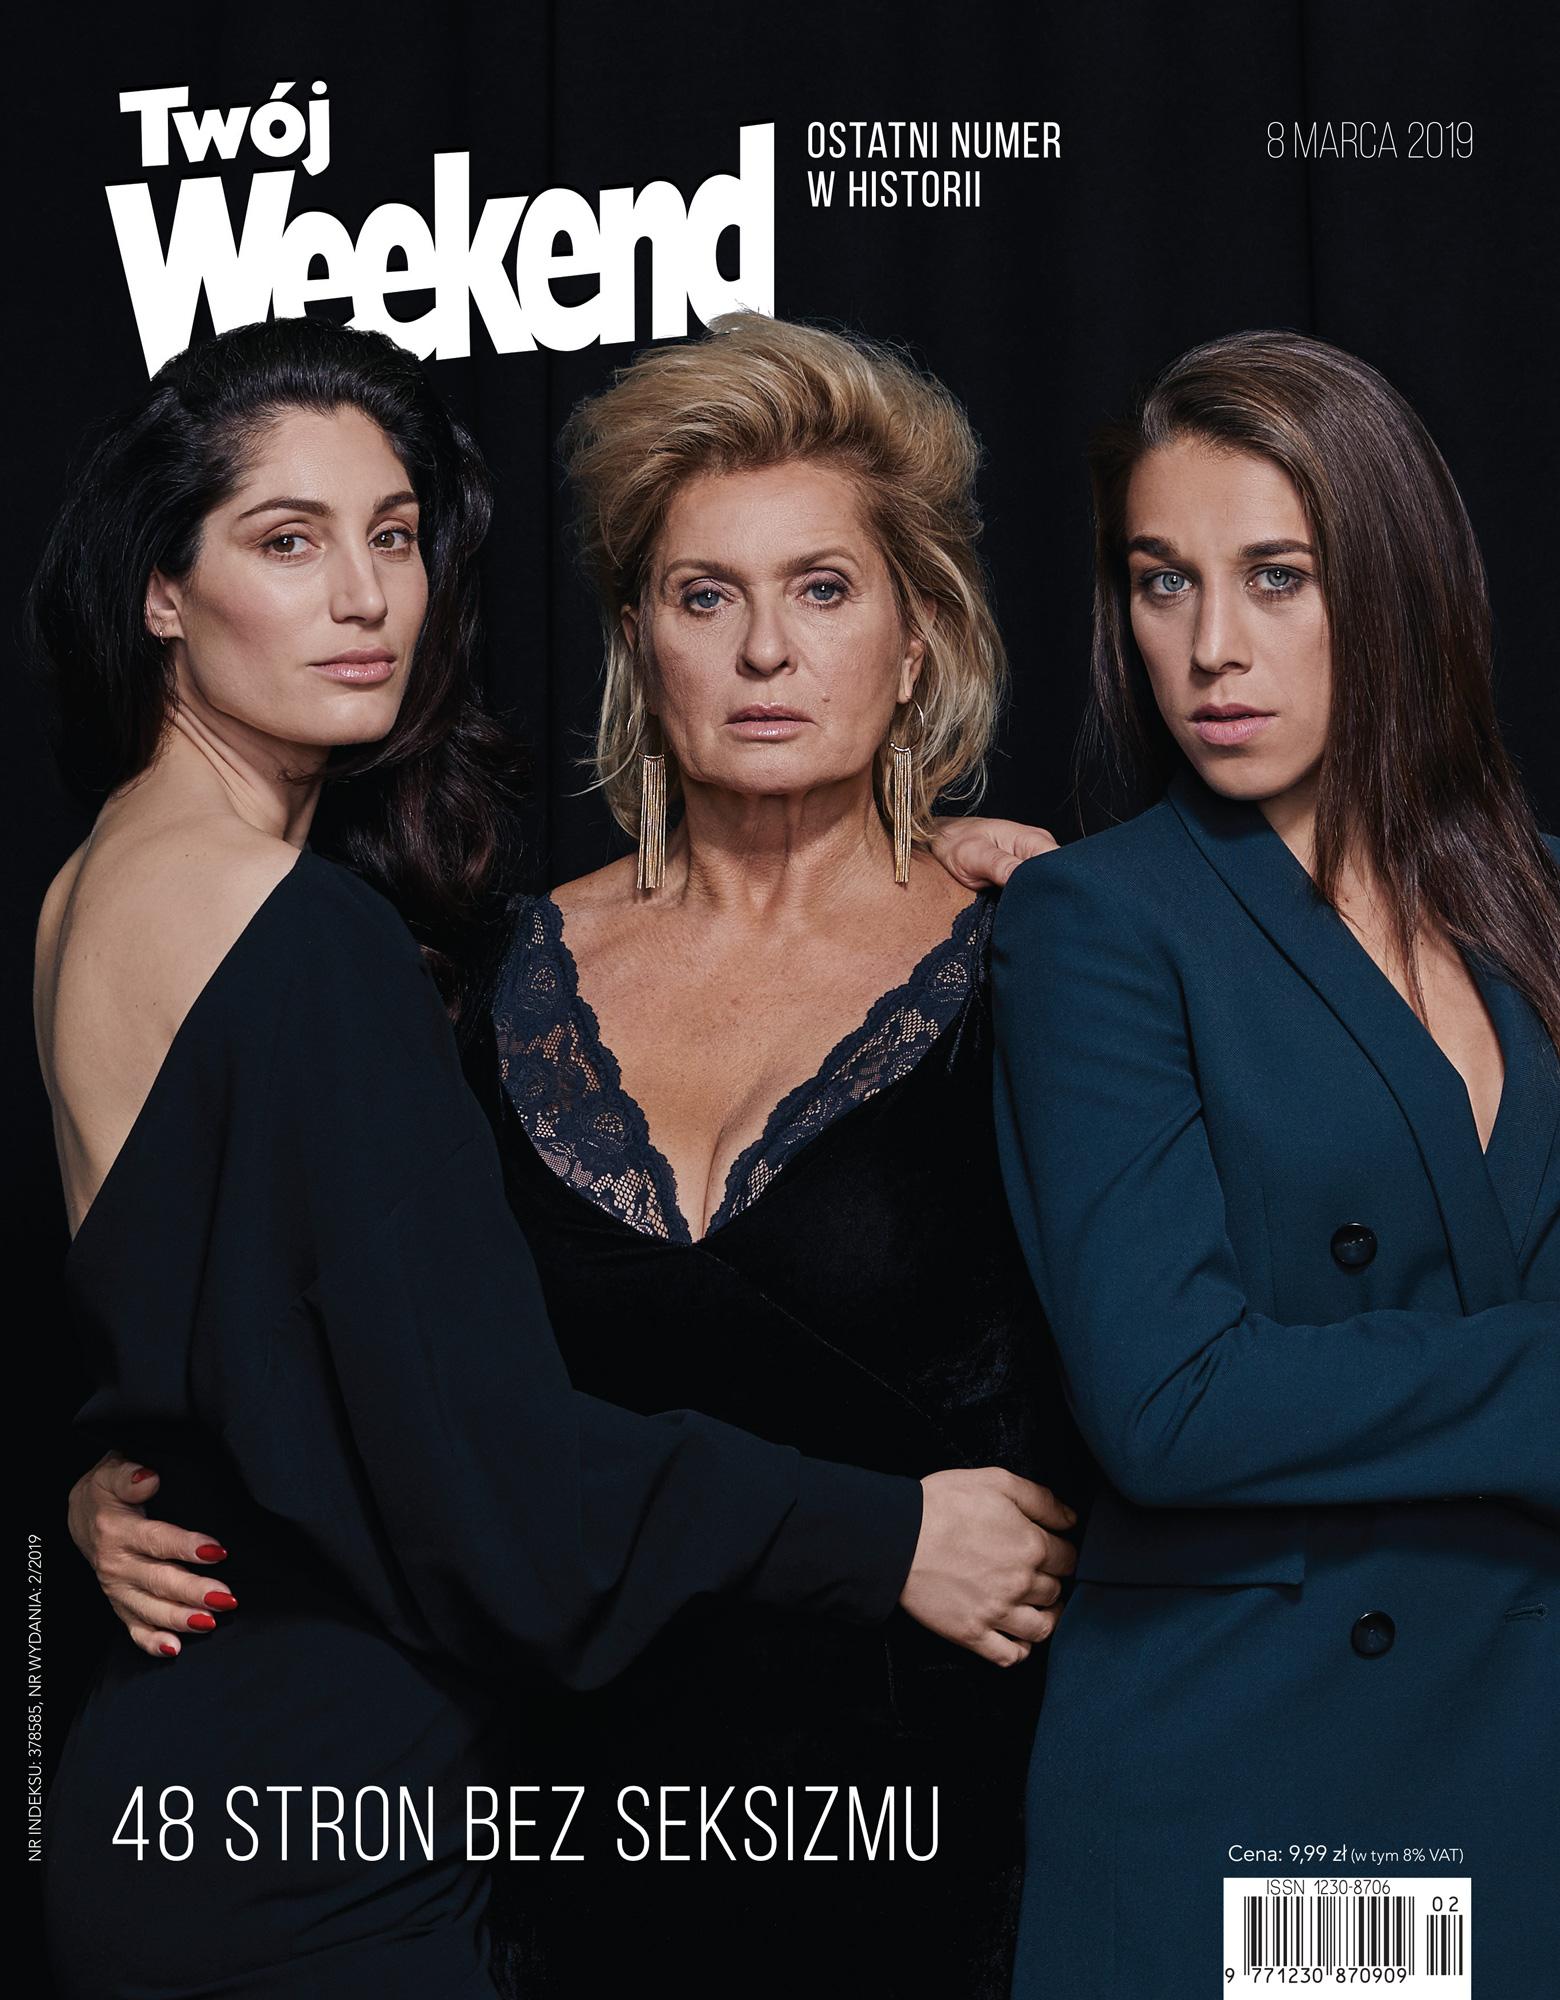 Twój Weekend - The Women’s Issue | The Last Ever Issue